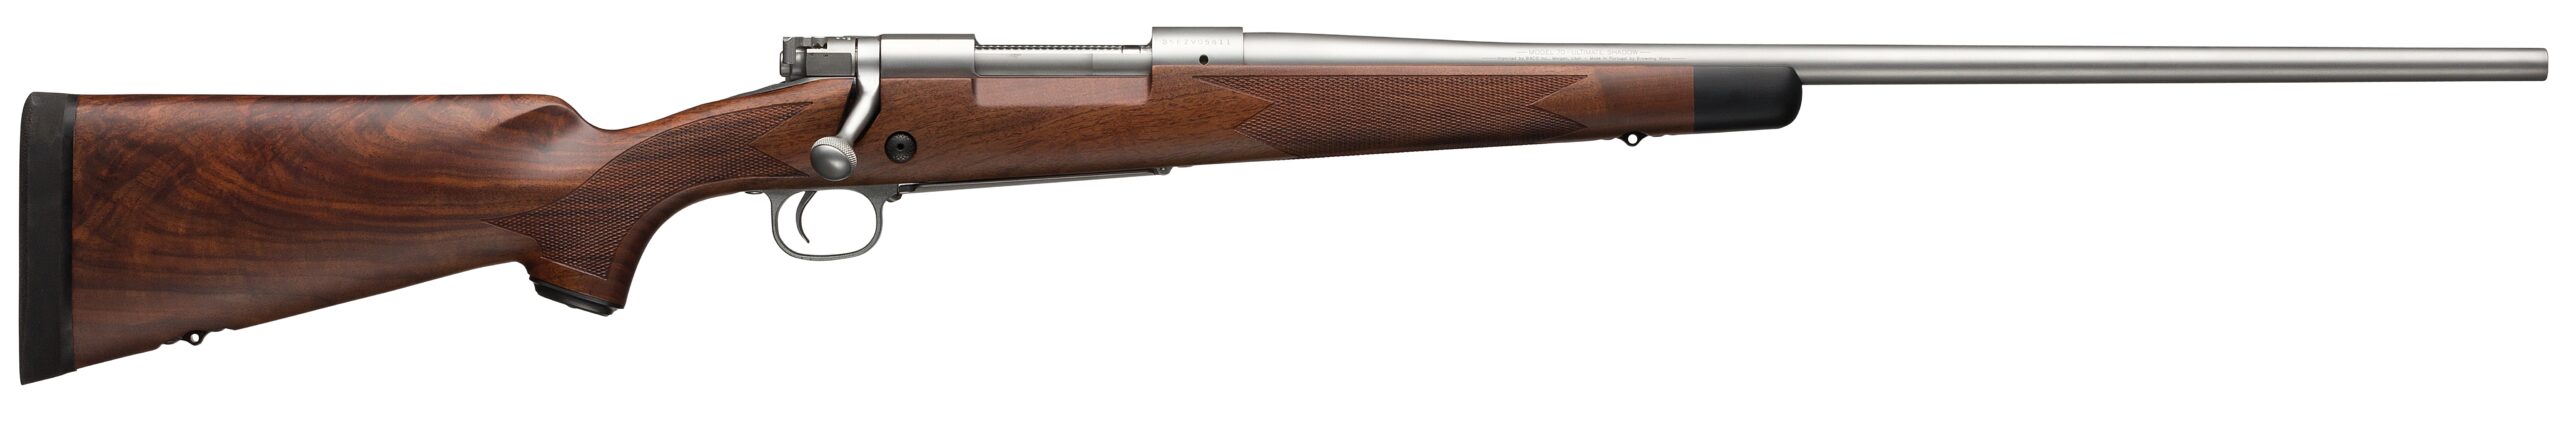 The Winchester Model 70